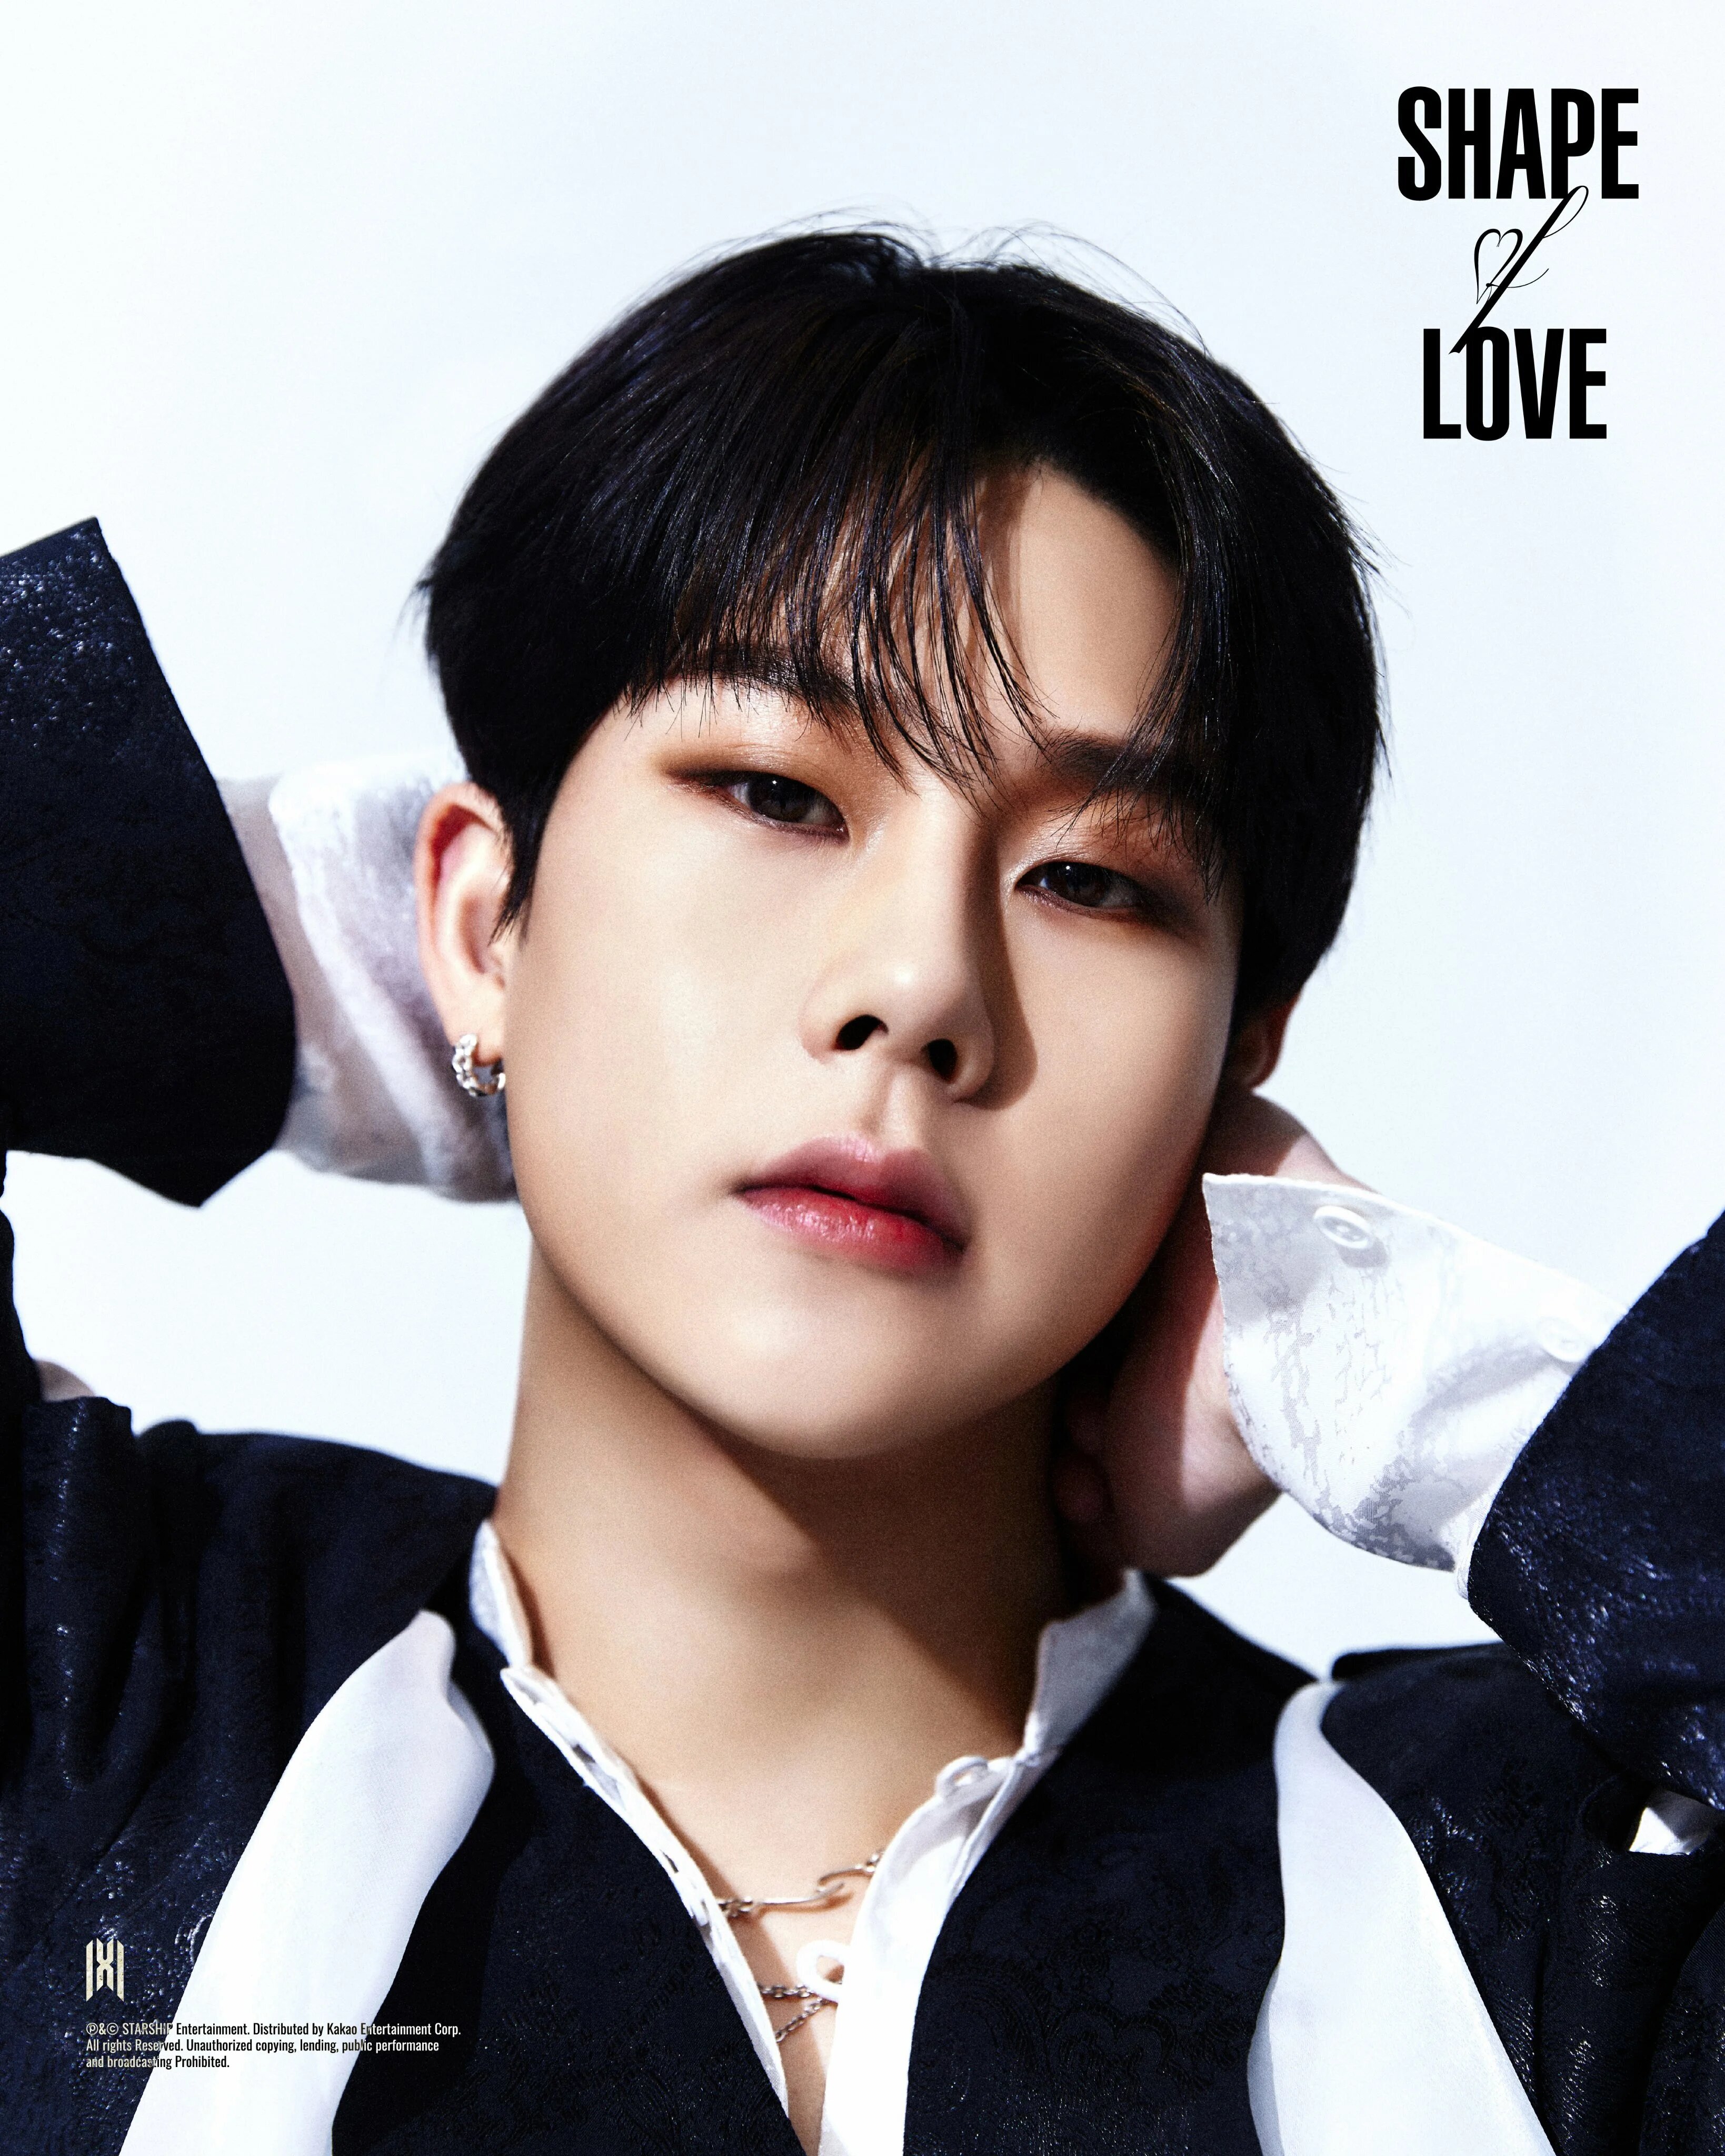 Monsta X releases 'SHAPE of LOVE' tracklist